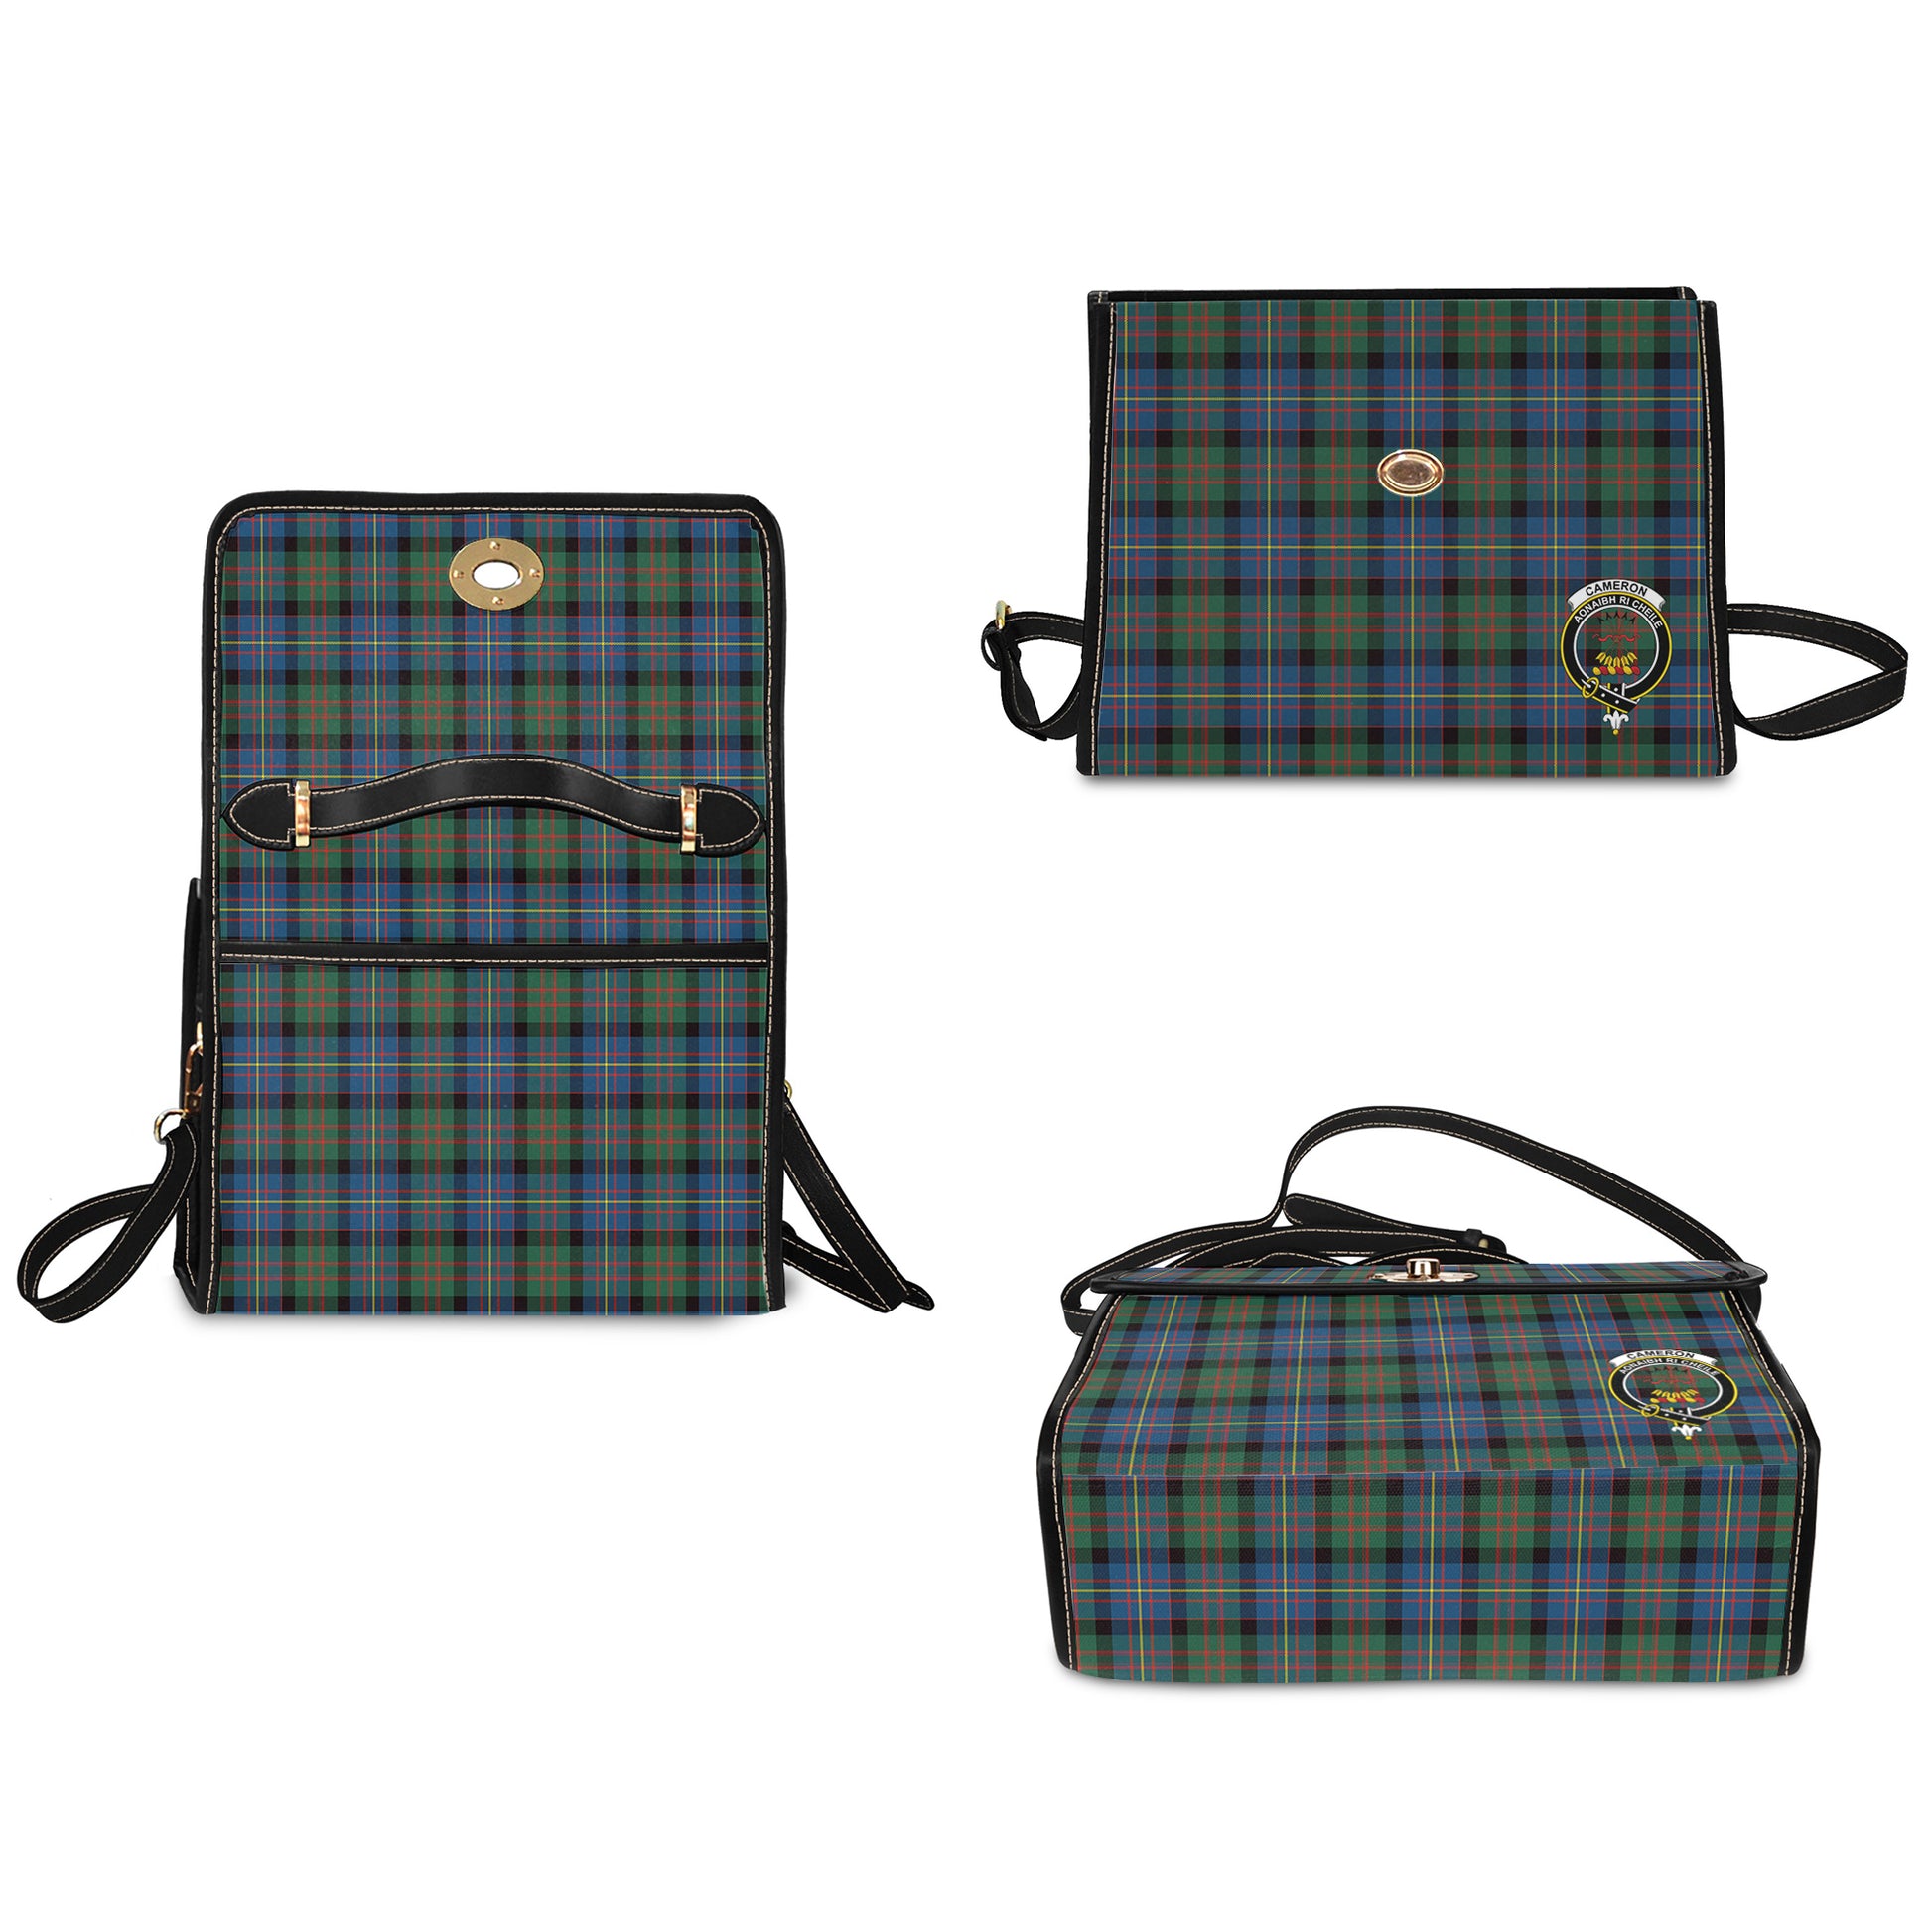 cameron-of-erracht-ancient-tartan-leather-strap-waterproof-canvas-bag-with-family-crest